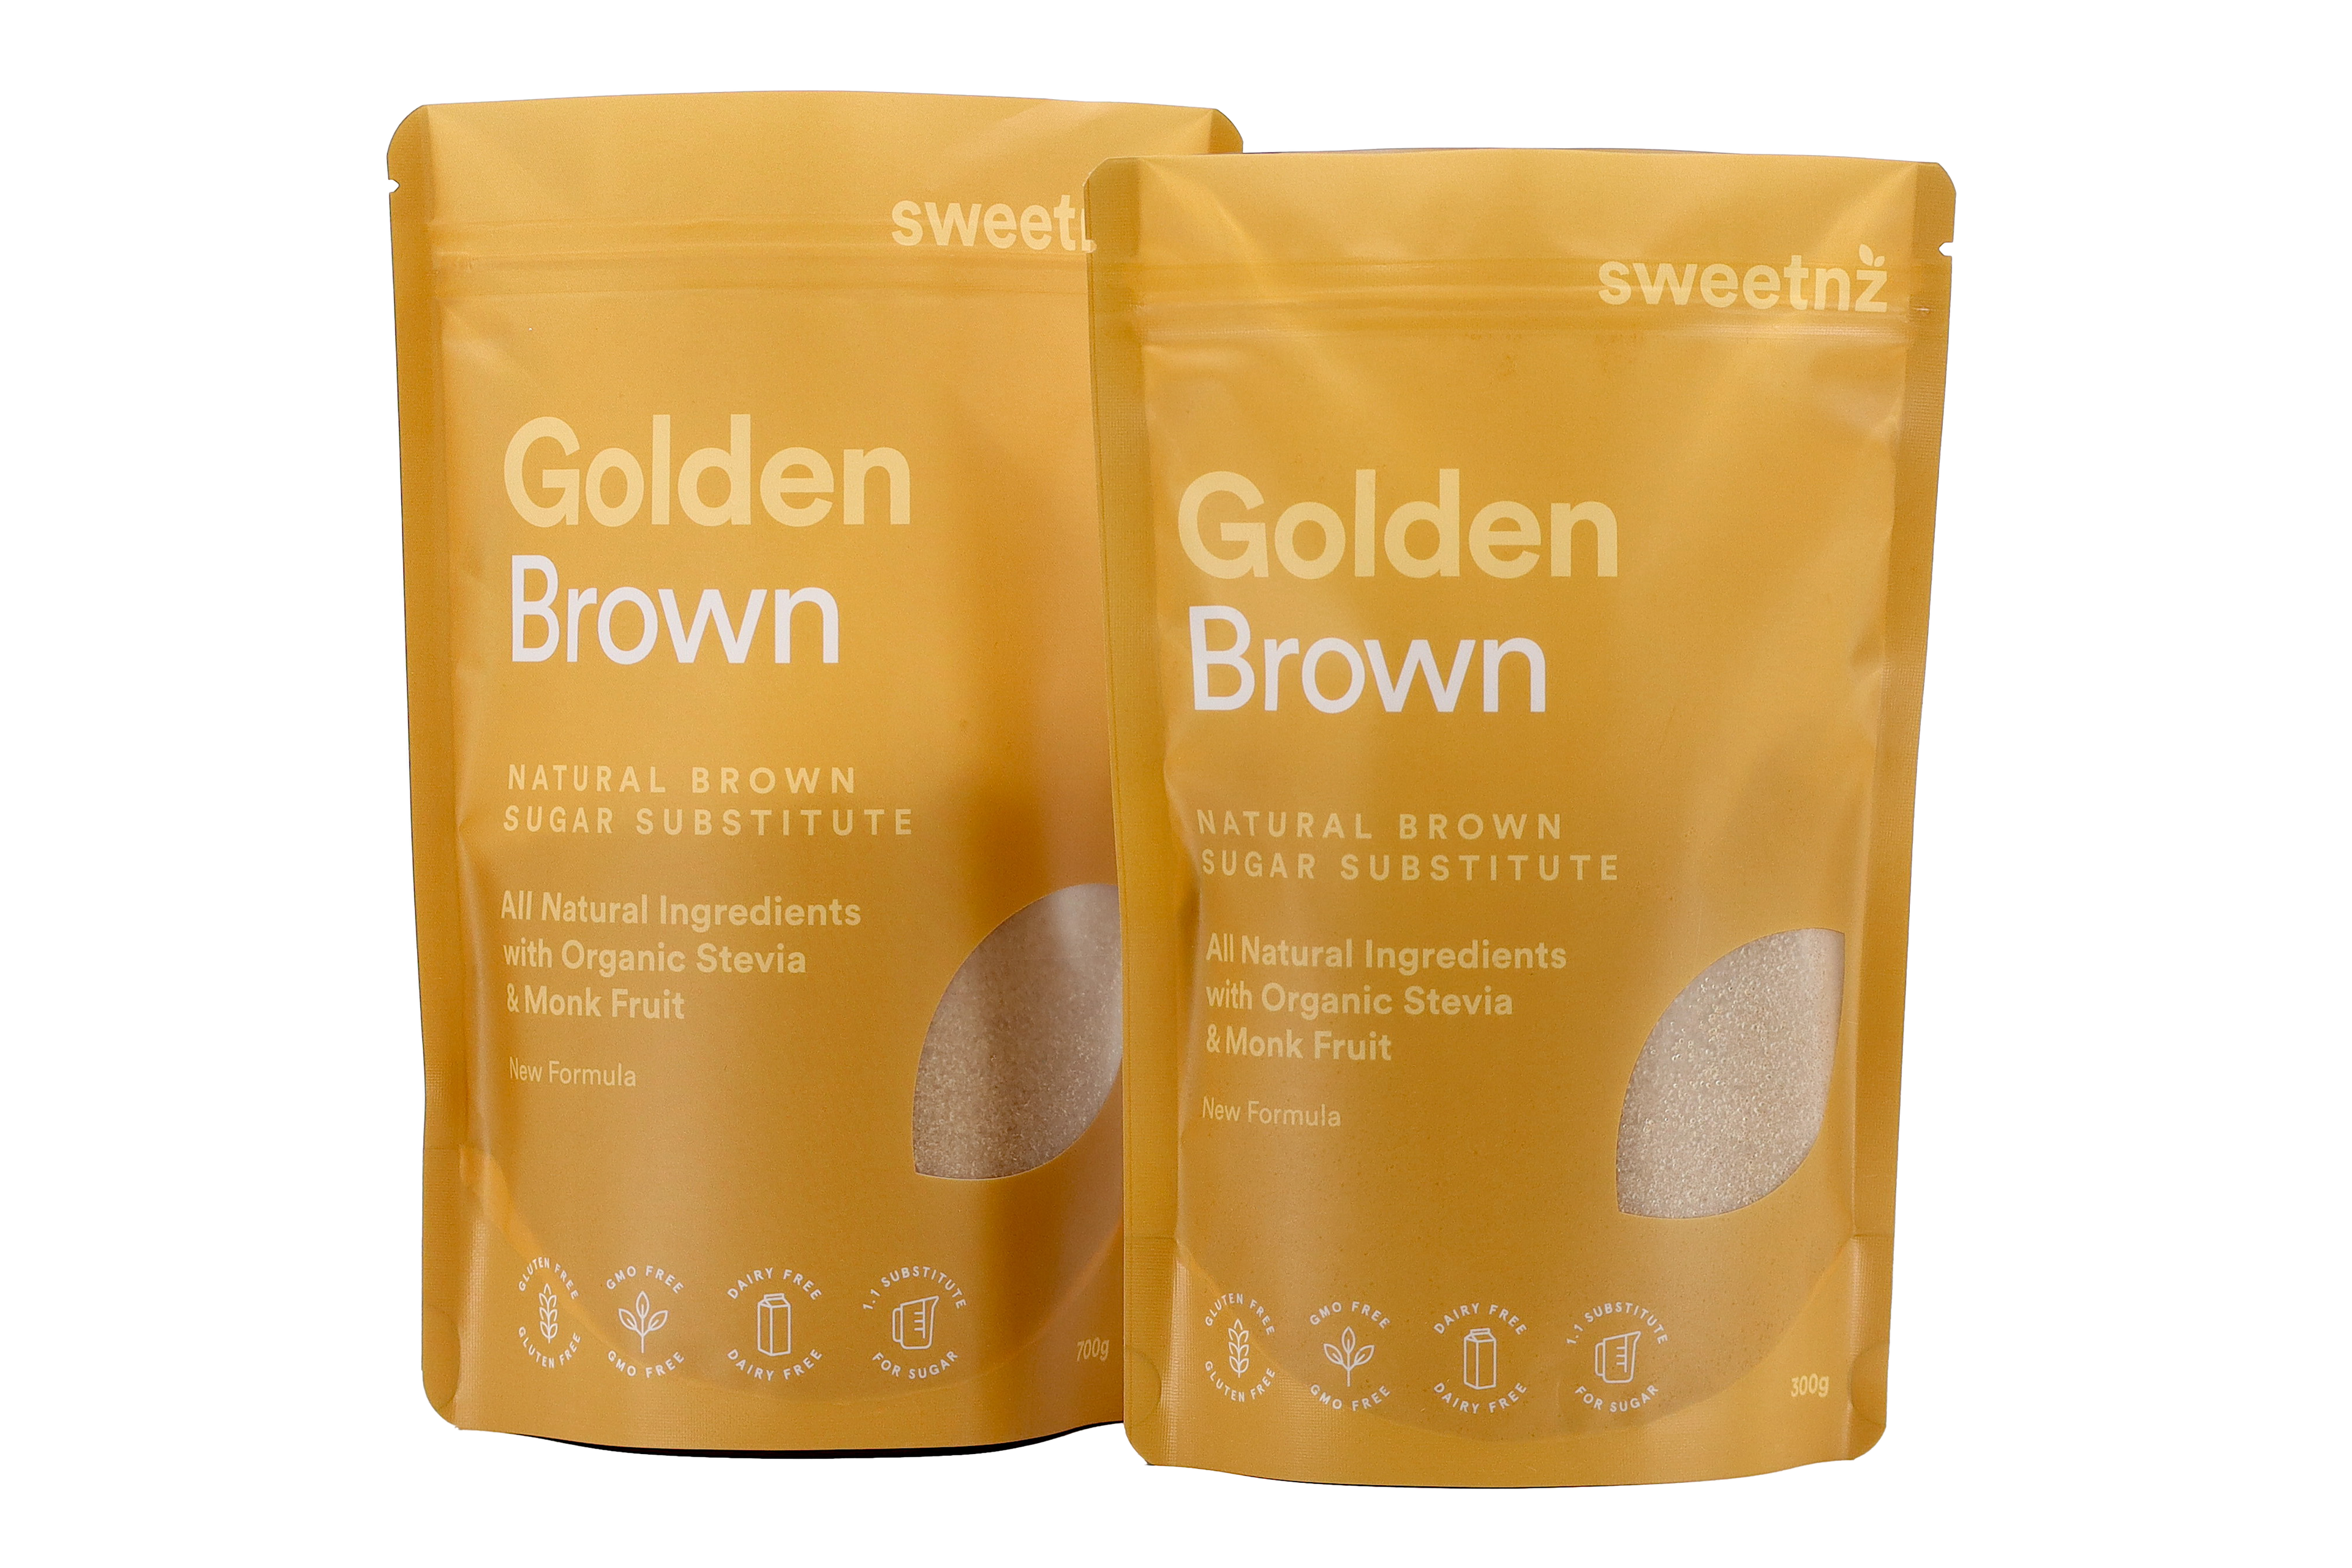 300g and 700g pair of Golden Brown. Available from June 1 (approximately) with an all new formula that includes organic Monk Fruit extract, organic Stevia extract, molasses and a touch of natural caramel flavouring.